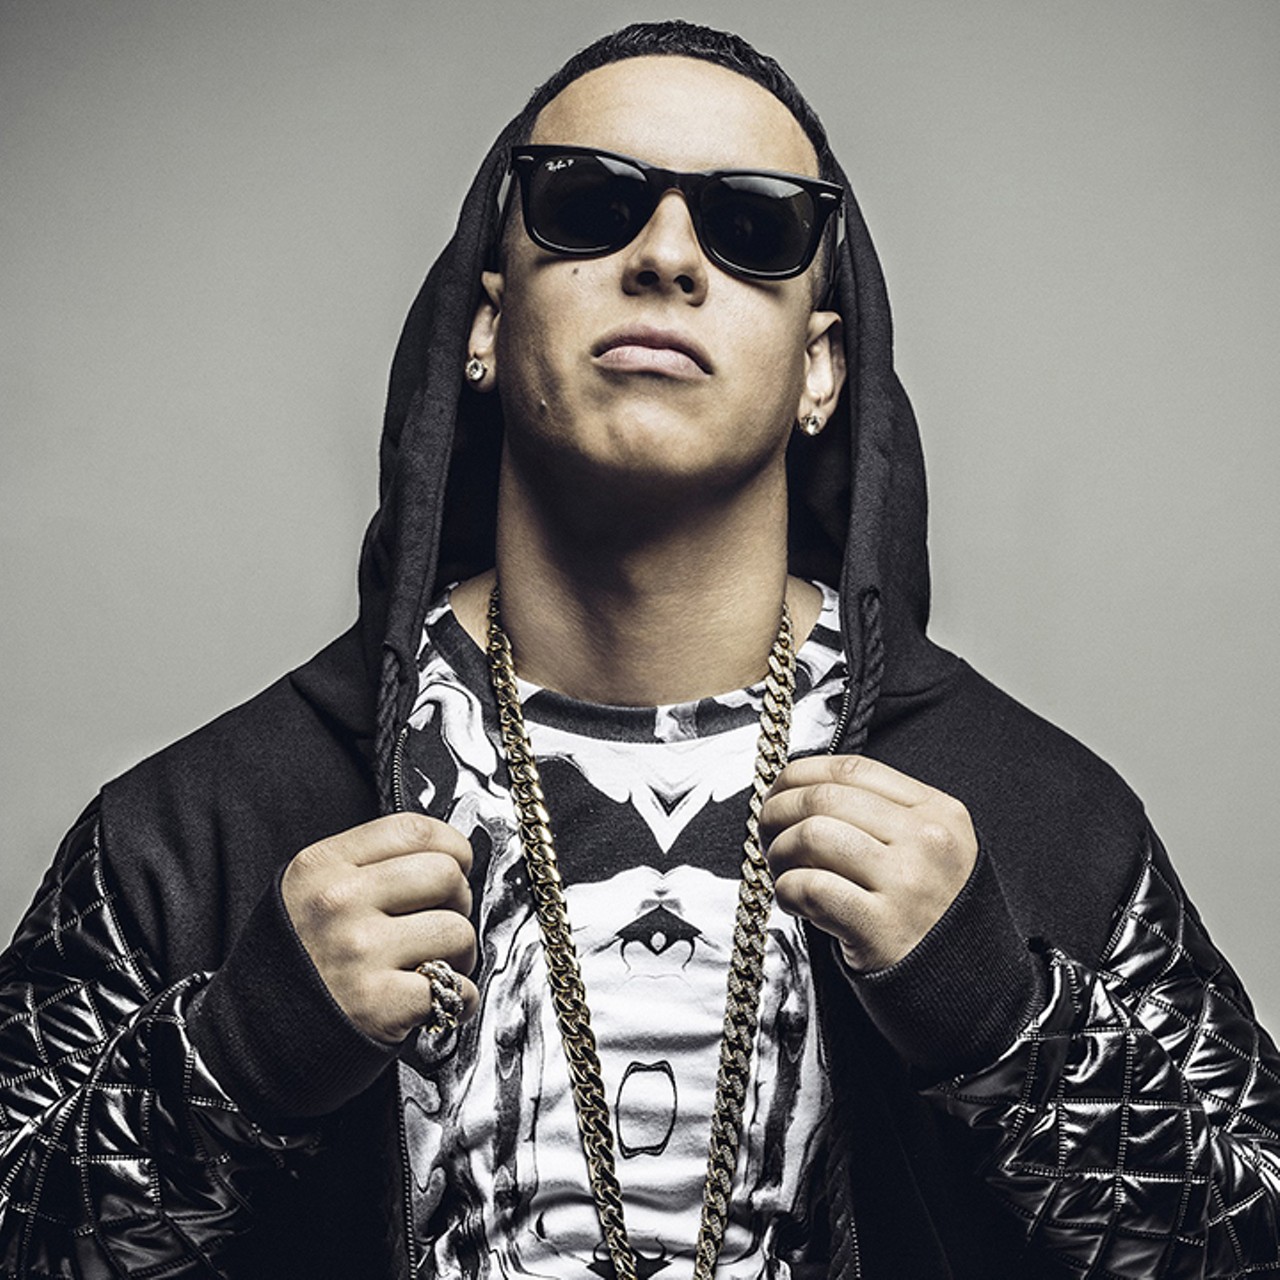 Sunday, Aug. 7Daddy Yankee at Amway Center